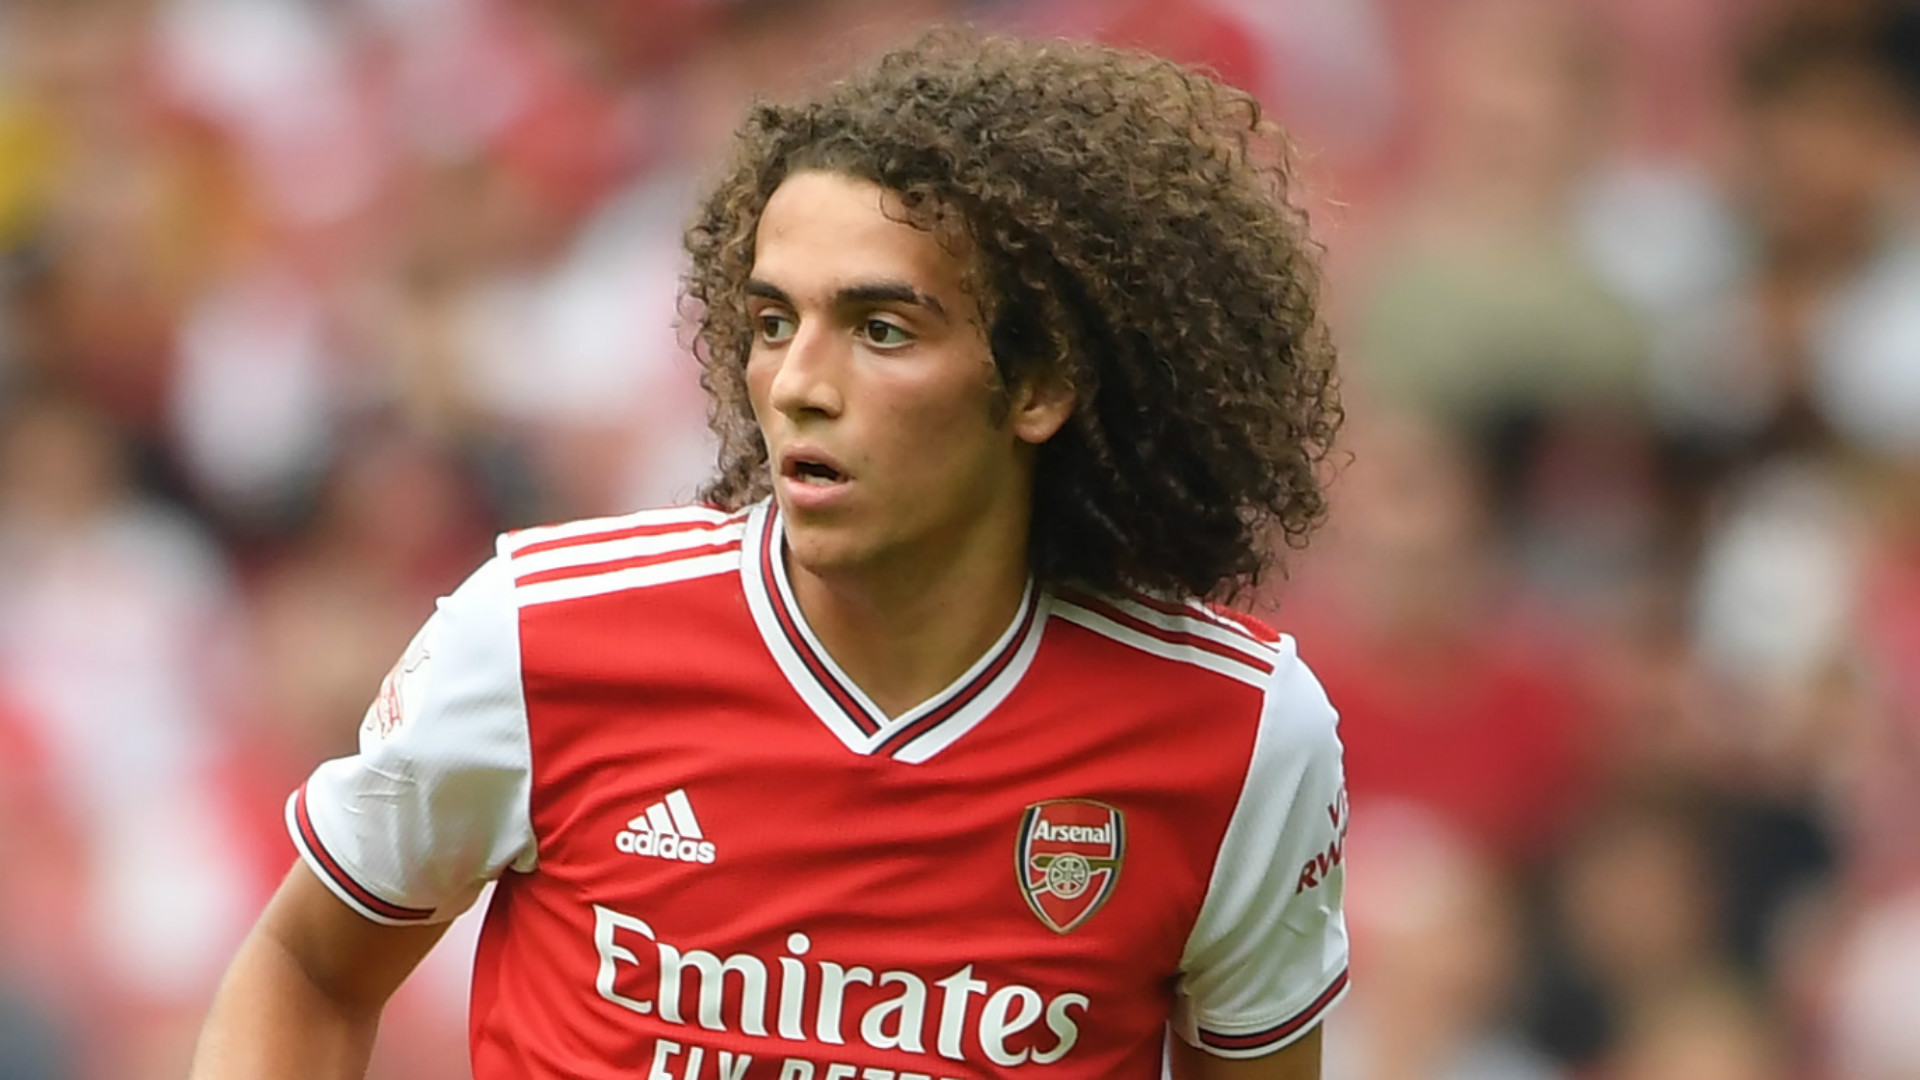 'Guendouzi has to mind his temper' - Arsenal star guilty of getting nervous & losing focus, says Gilberto